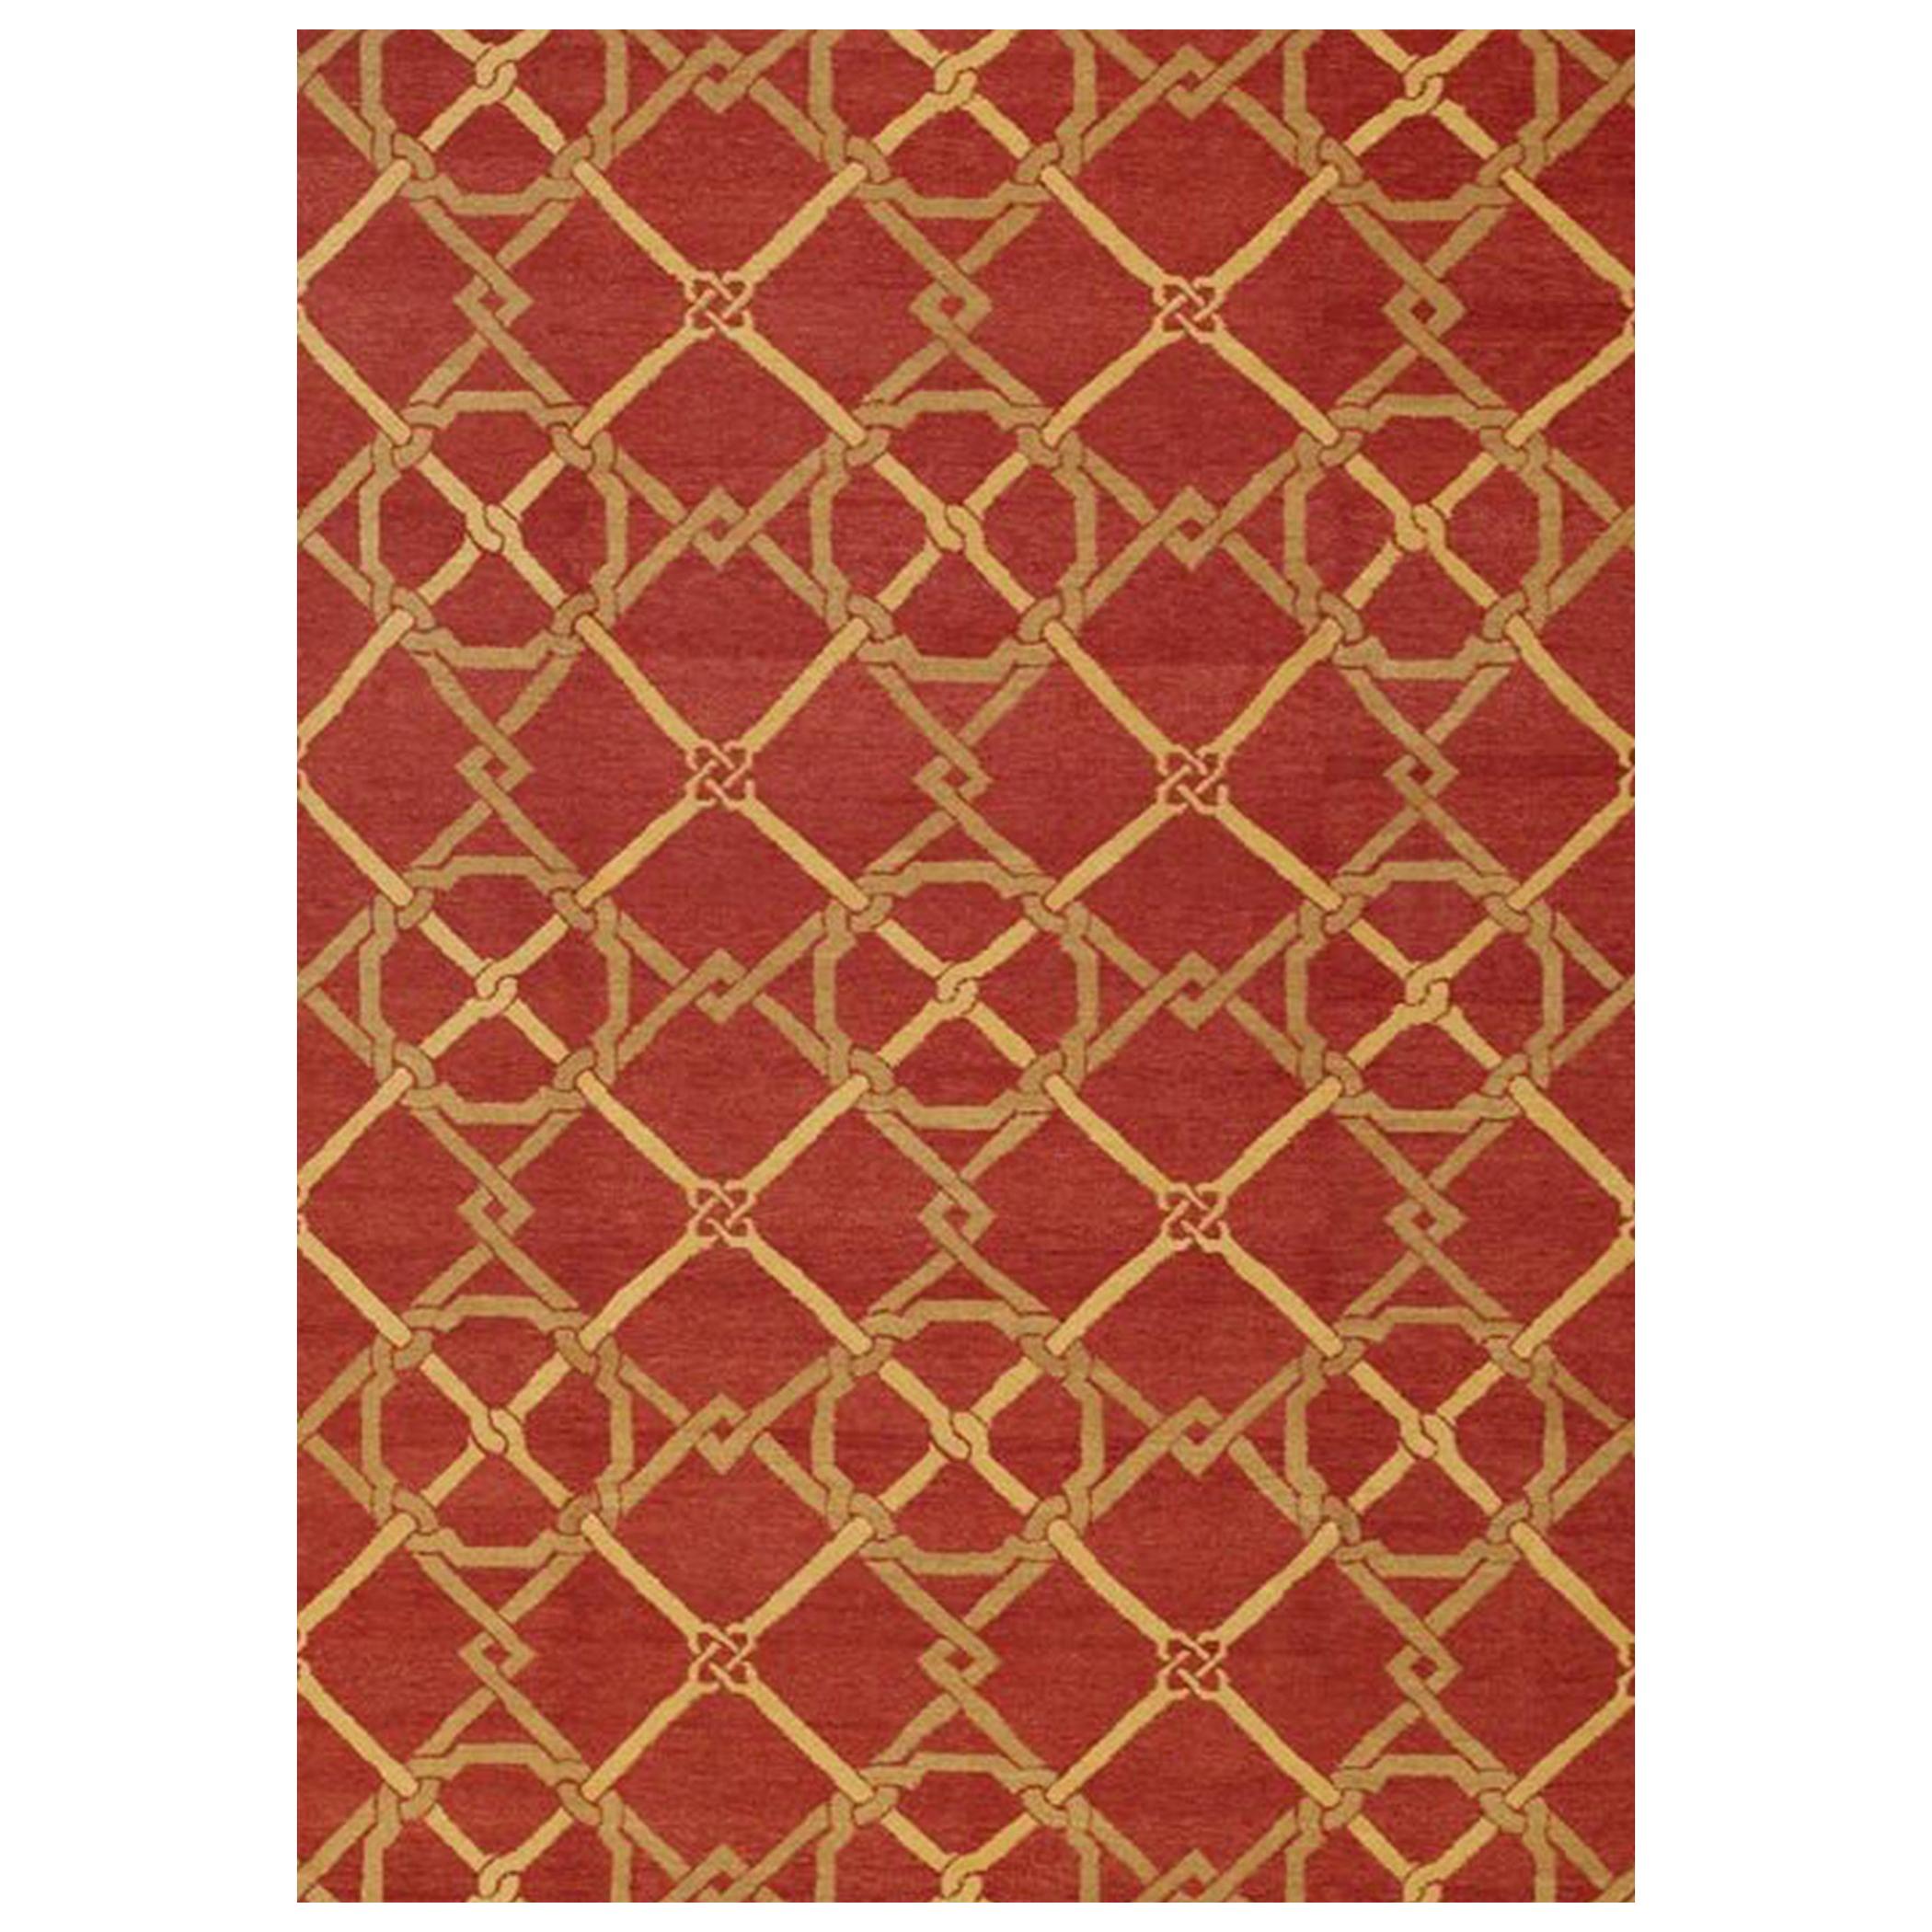 Luxury Handspun Wool Red / Gold Area Rug 10'x14' For Sale